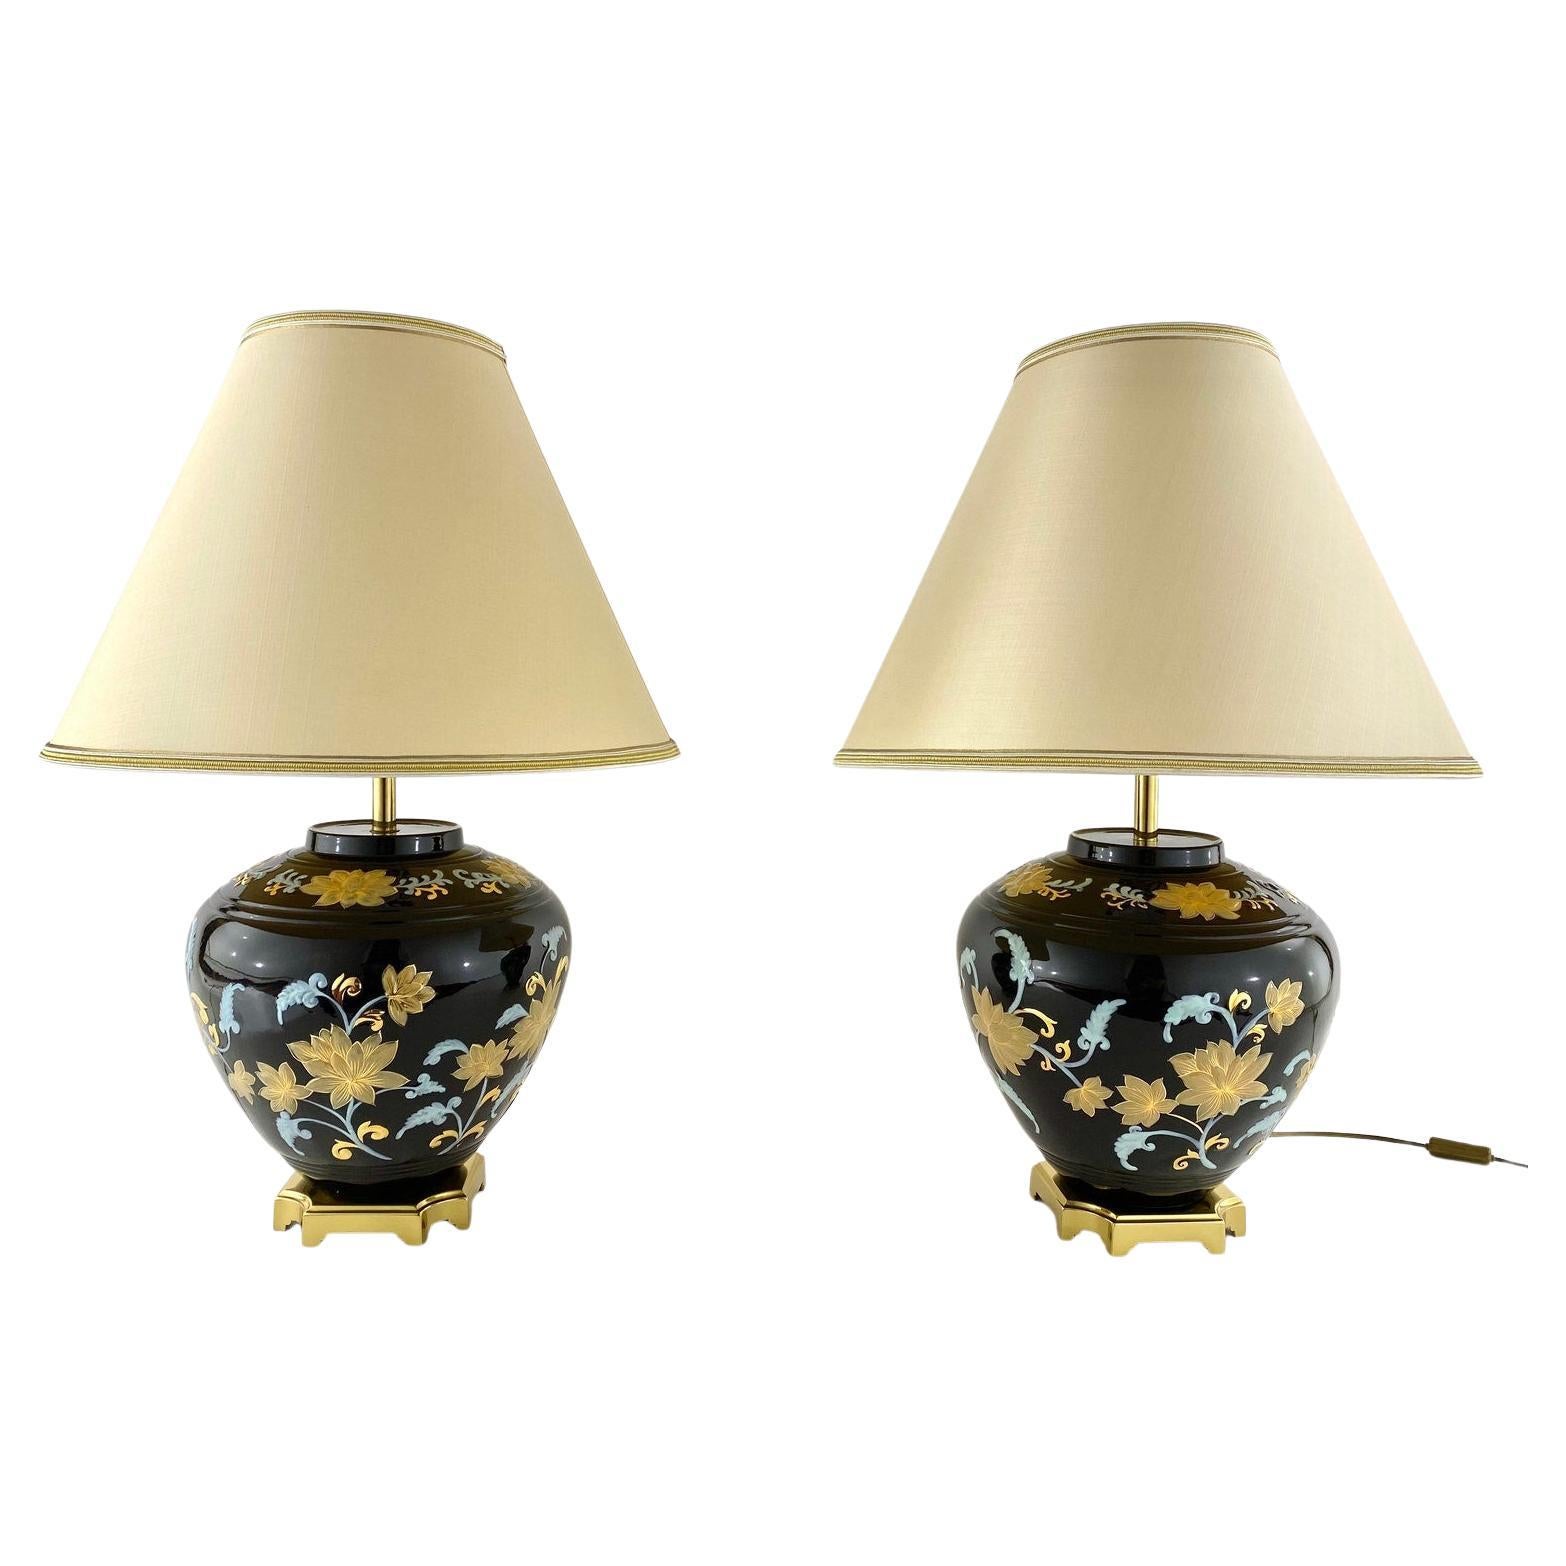 Vintage Pair Of Table Lamps 1980s  Bronze And Porcelain Paired Lamps, France For Sale